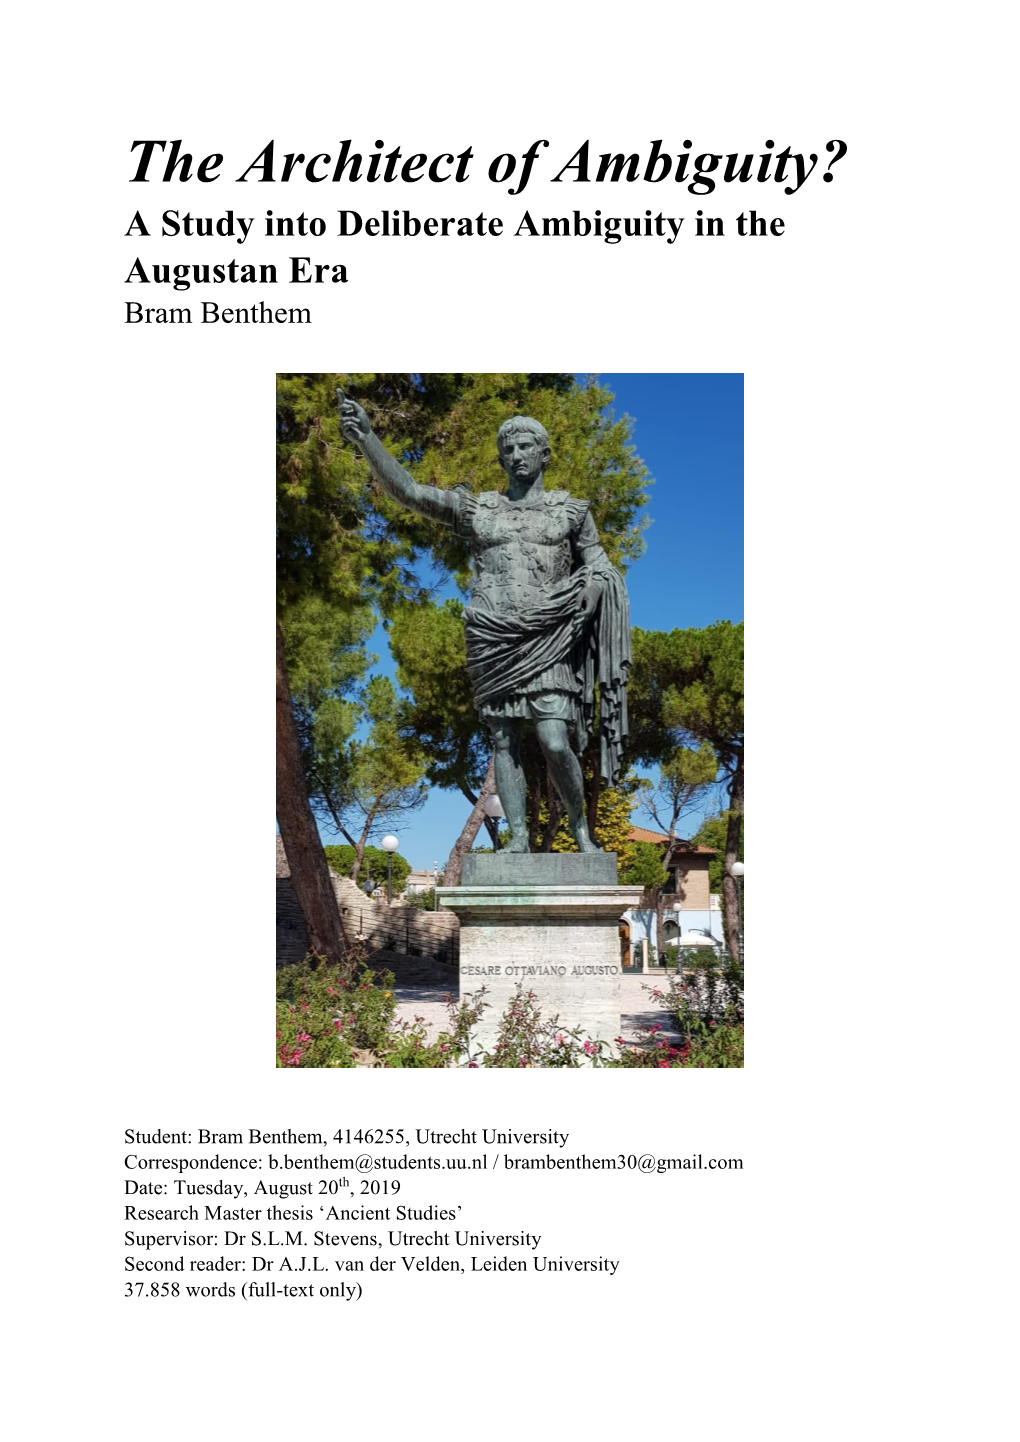 The Architect of Ambiguity? a Study Into Deliberate Ambiguity in the Augustan Era Bram Benthem